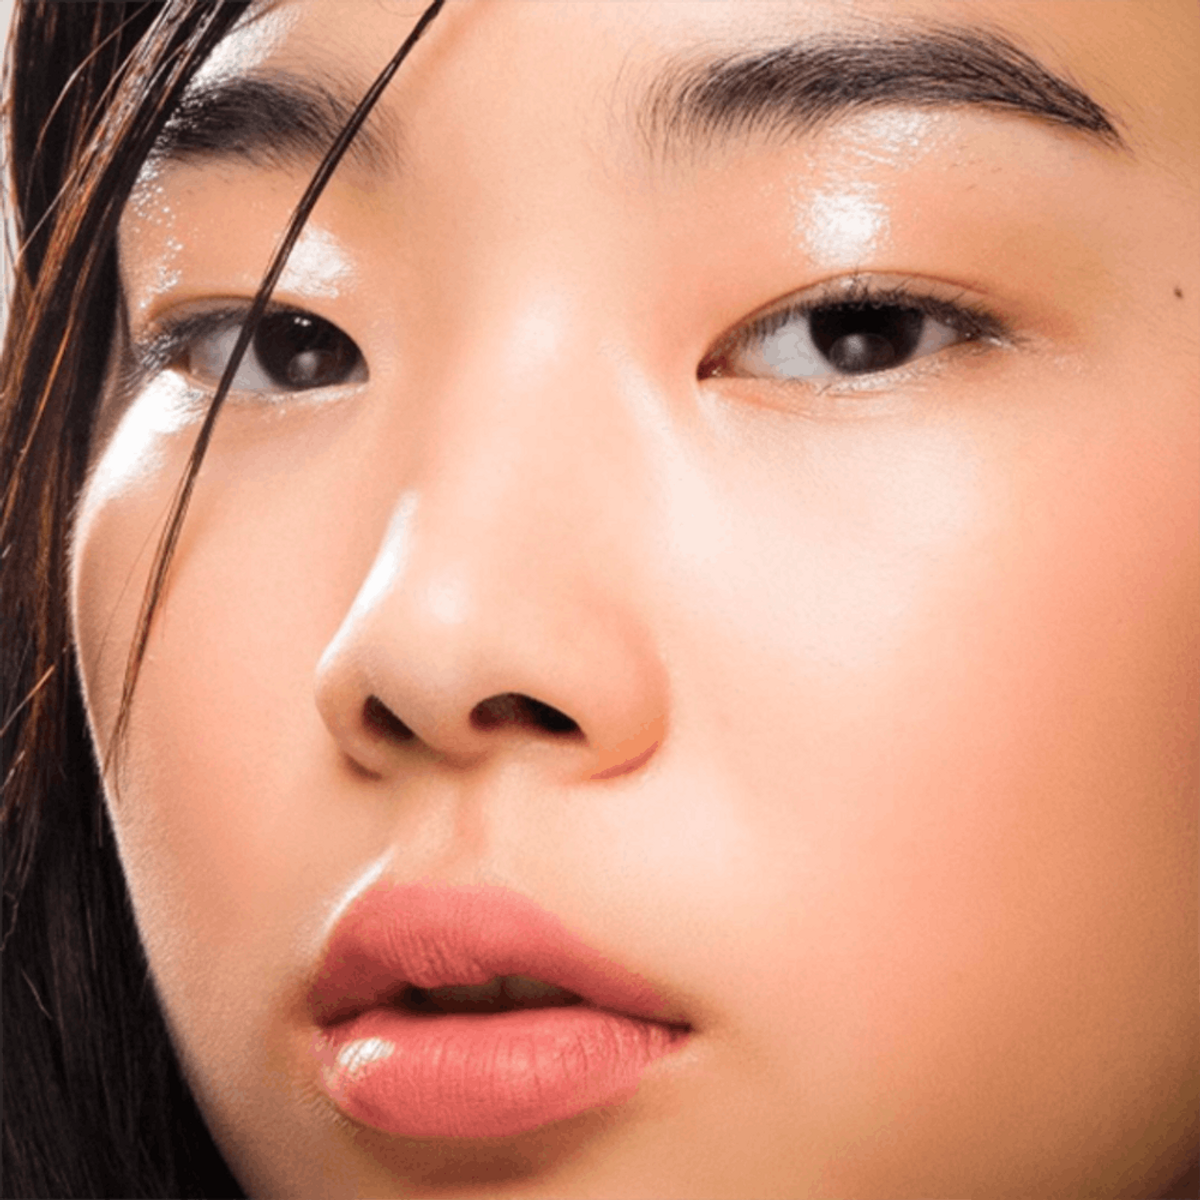 Why Lid Gloss Is the Instagram Beauty Trend You Need to Try